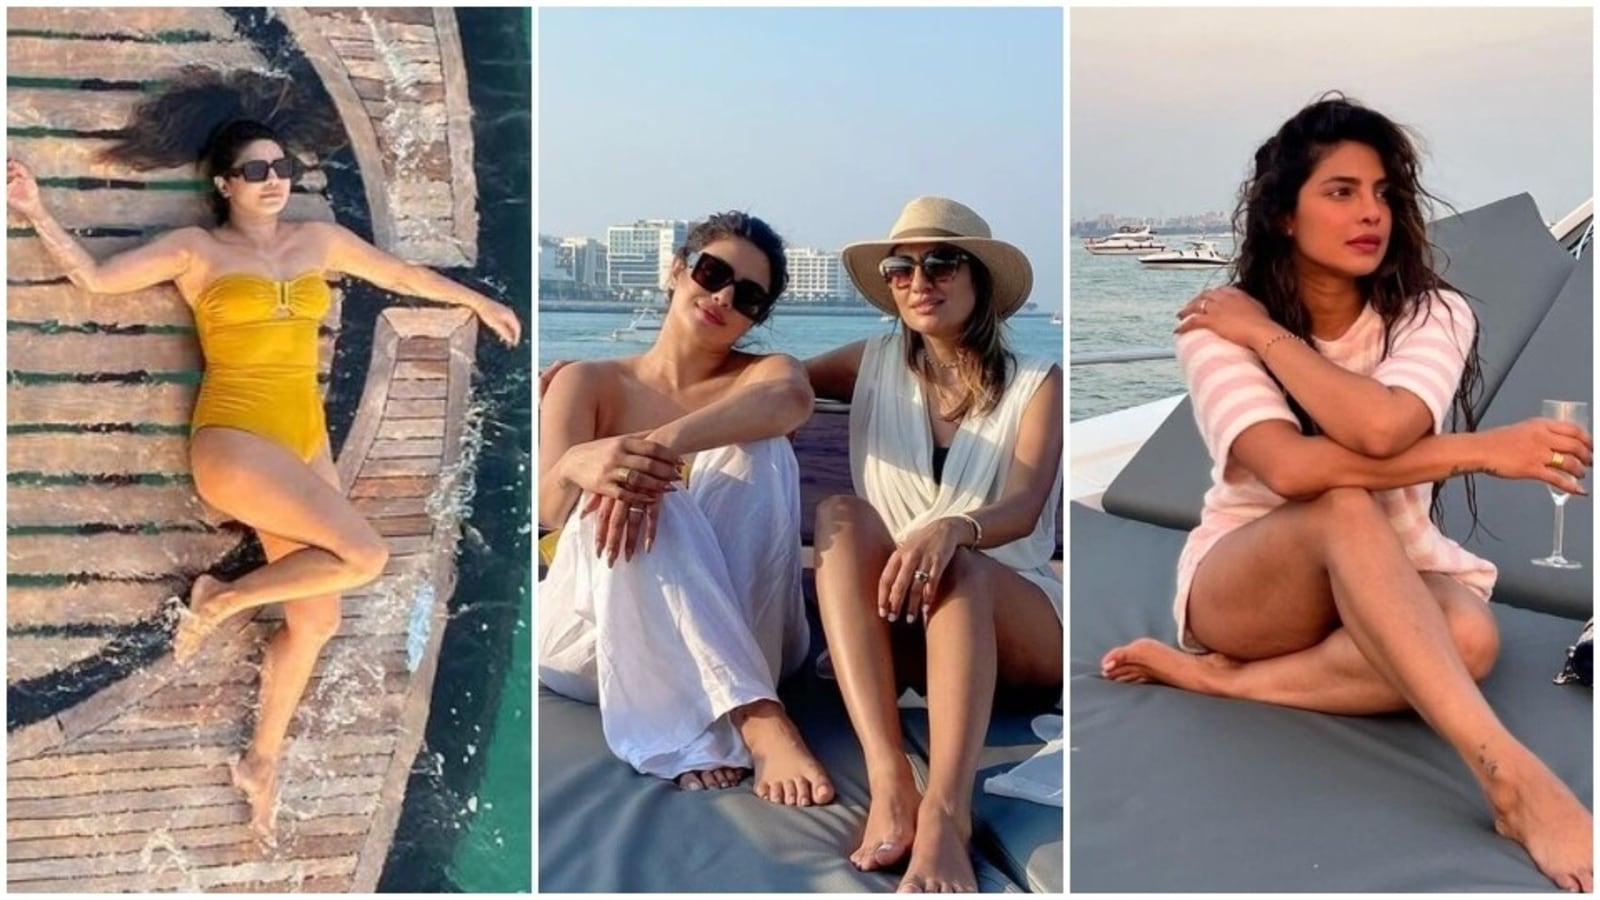 Priyanka Chopra dresses up in a yellow swimsuit to enjoy Dubai, shares  stunning pics and videos chilling with friends | Fashion Trends - Hindustan  Times